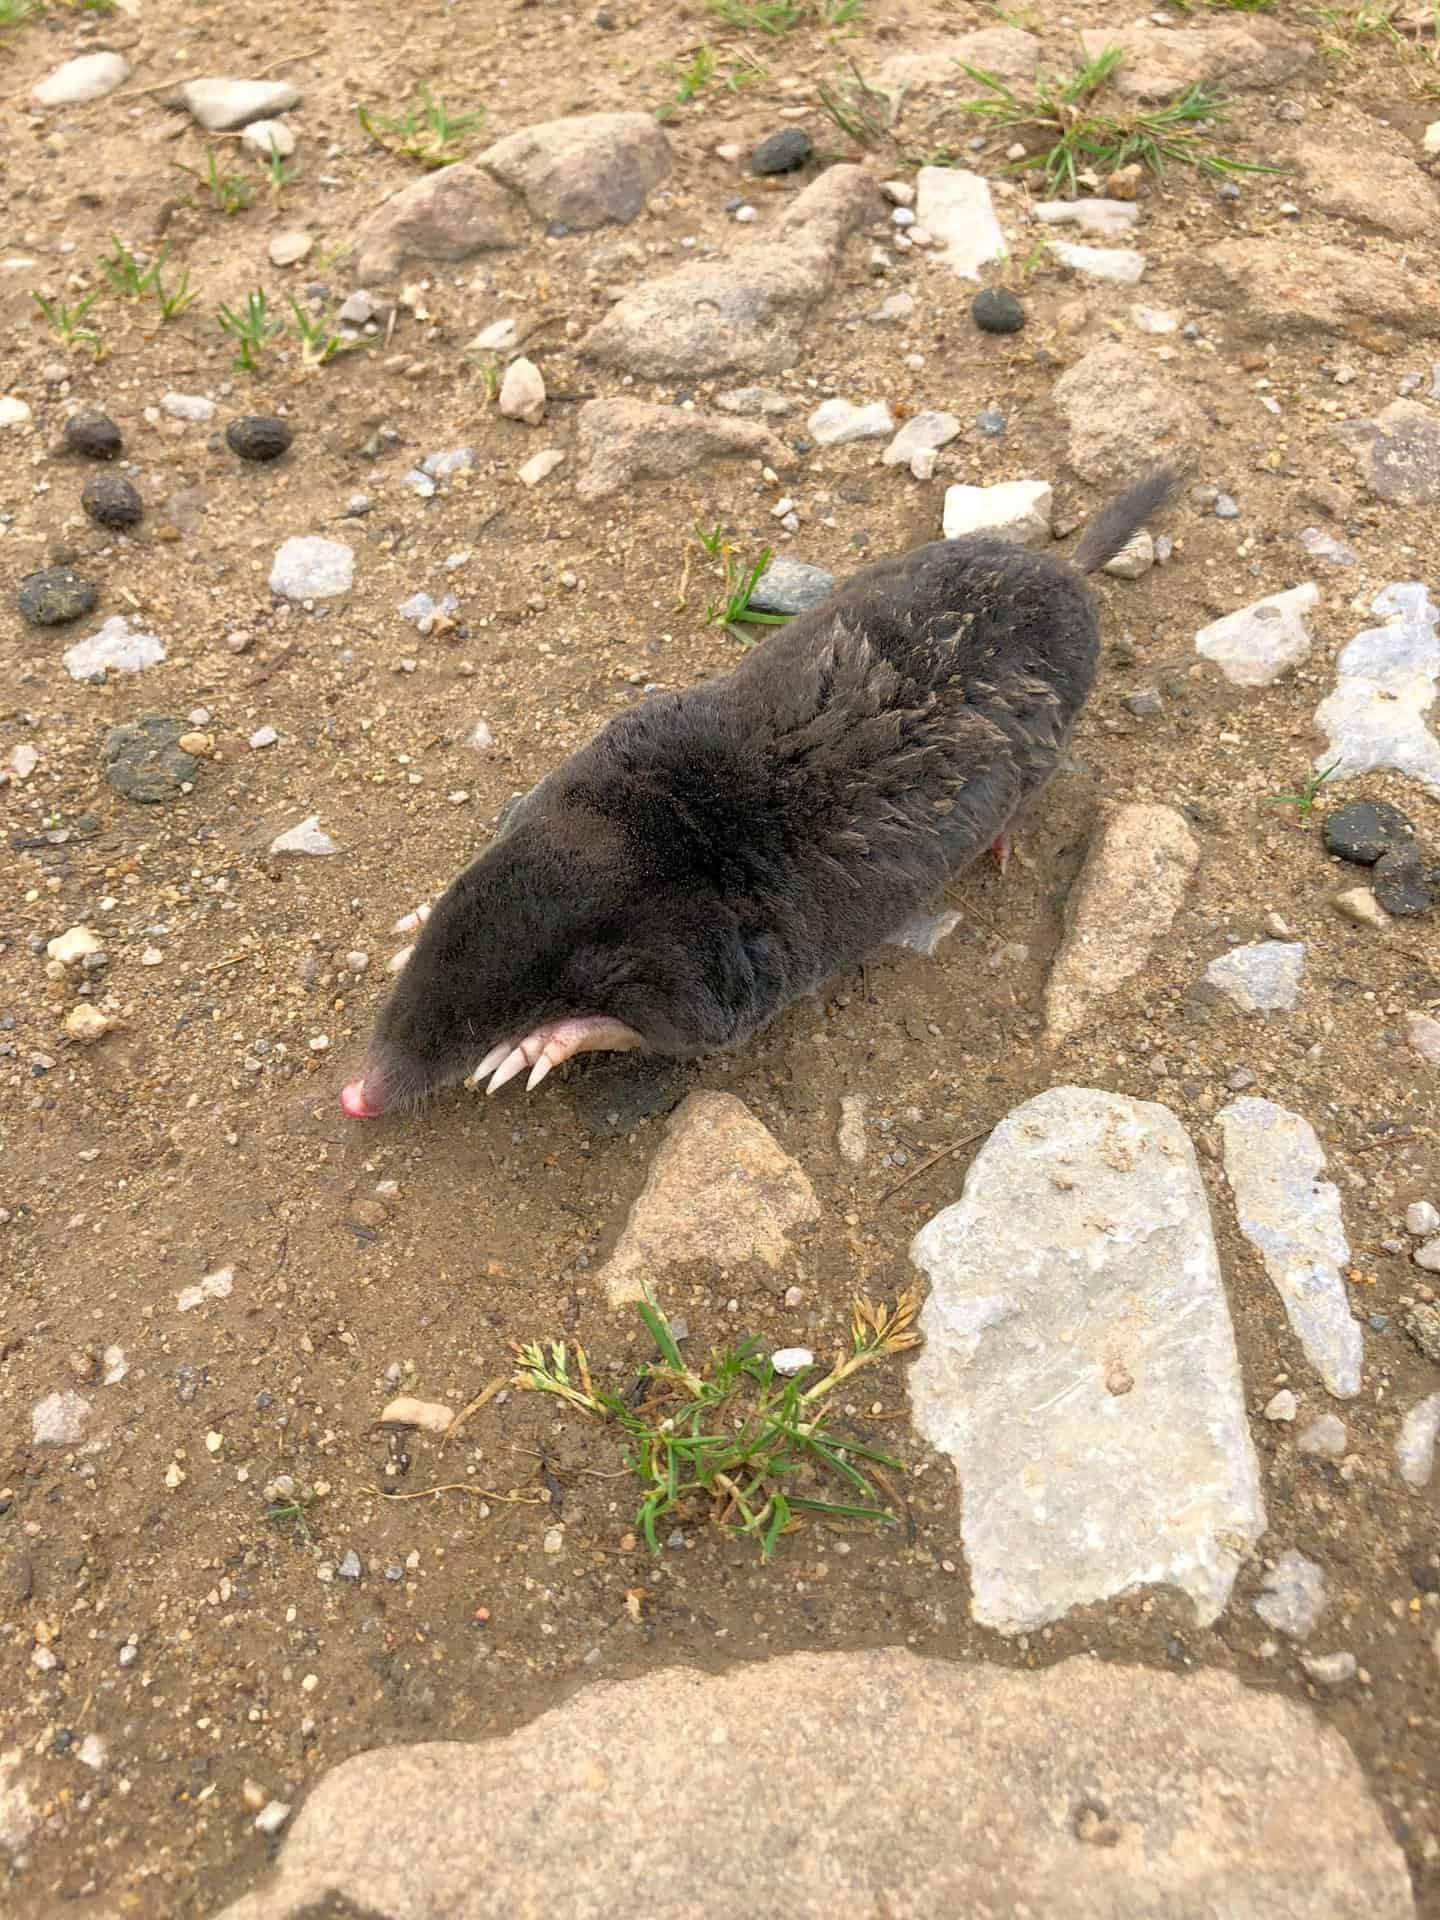 A rare sighting as this little creature scurried across the path. Moles are common in Britain but spend almost their entire life underground. It's the first time I have ever seen one alive in the wild.